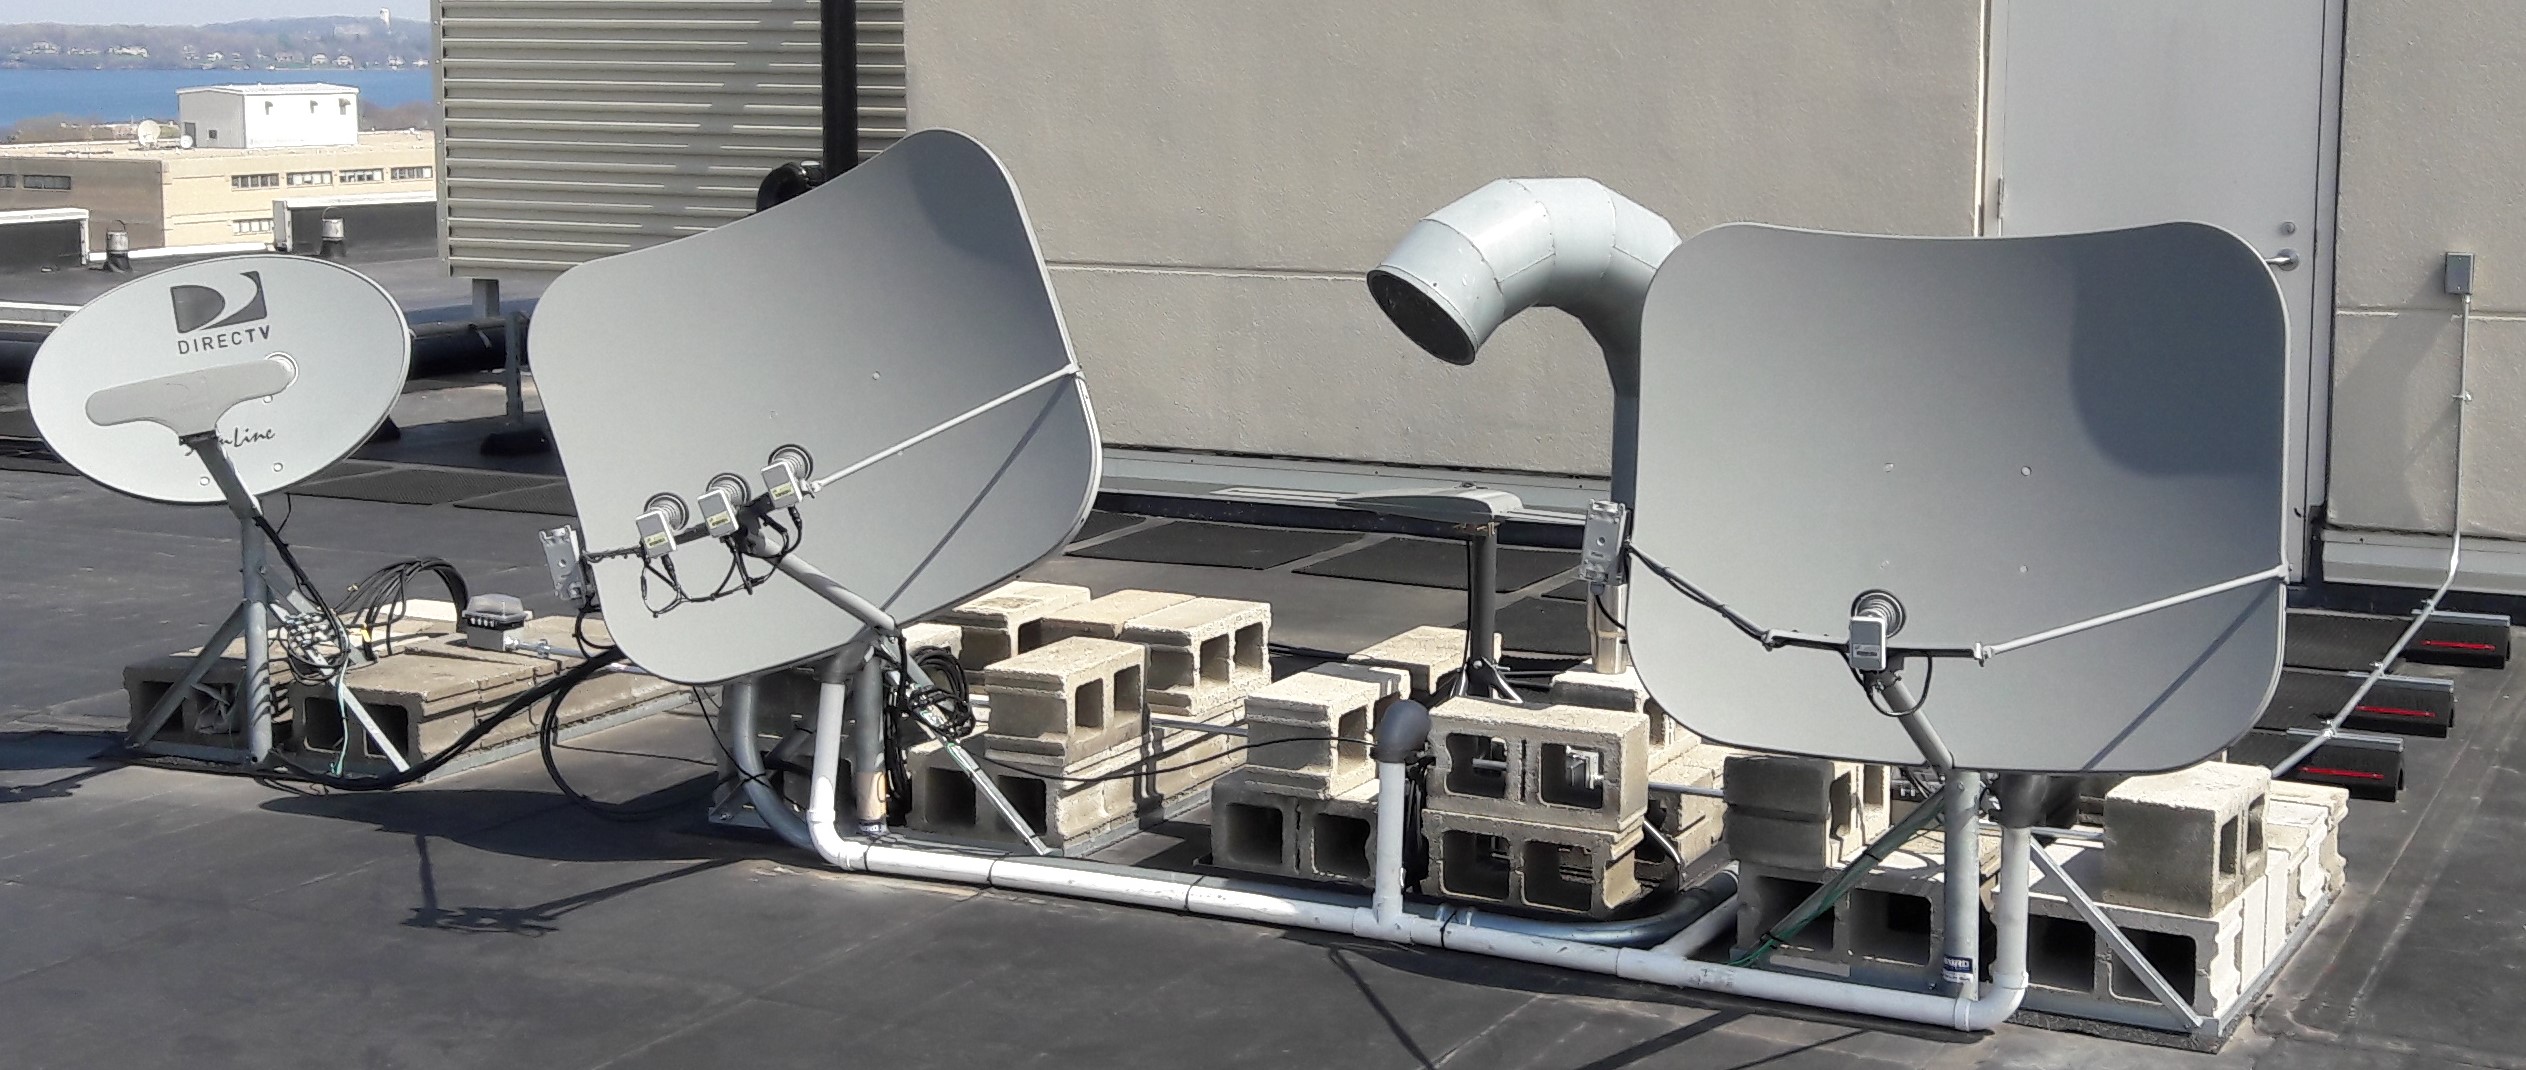 commercial dish network